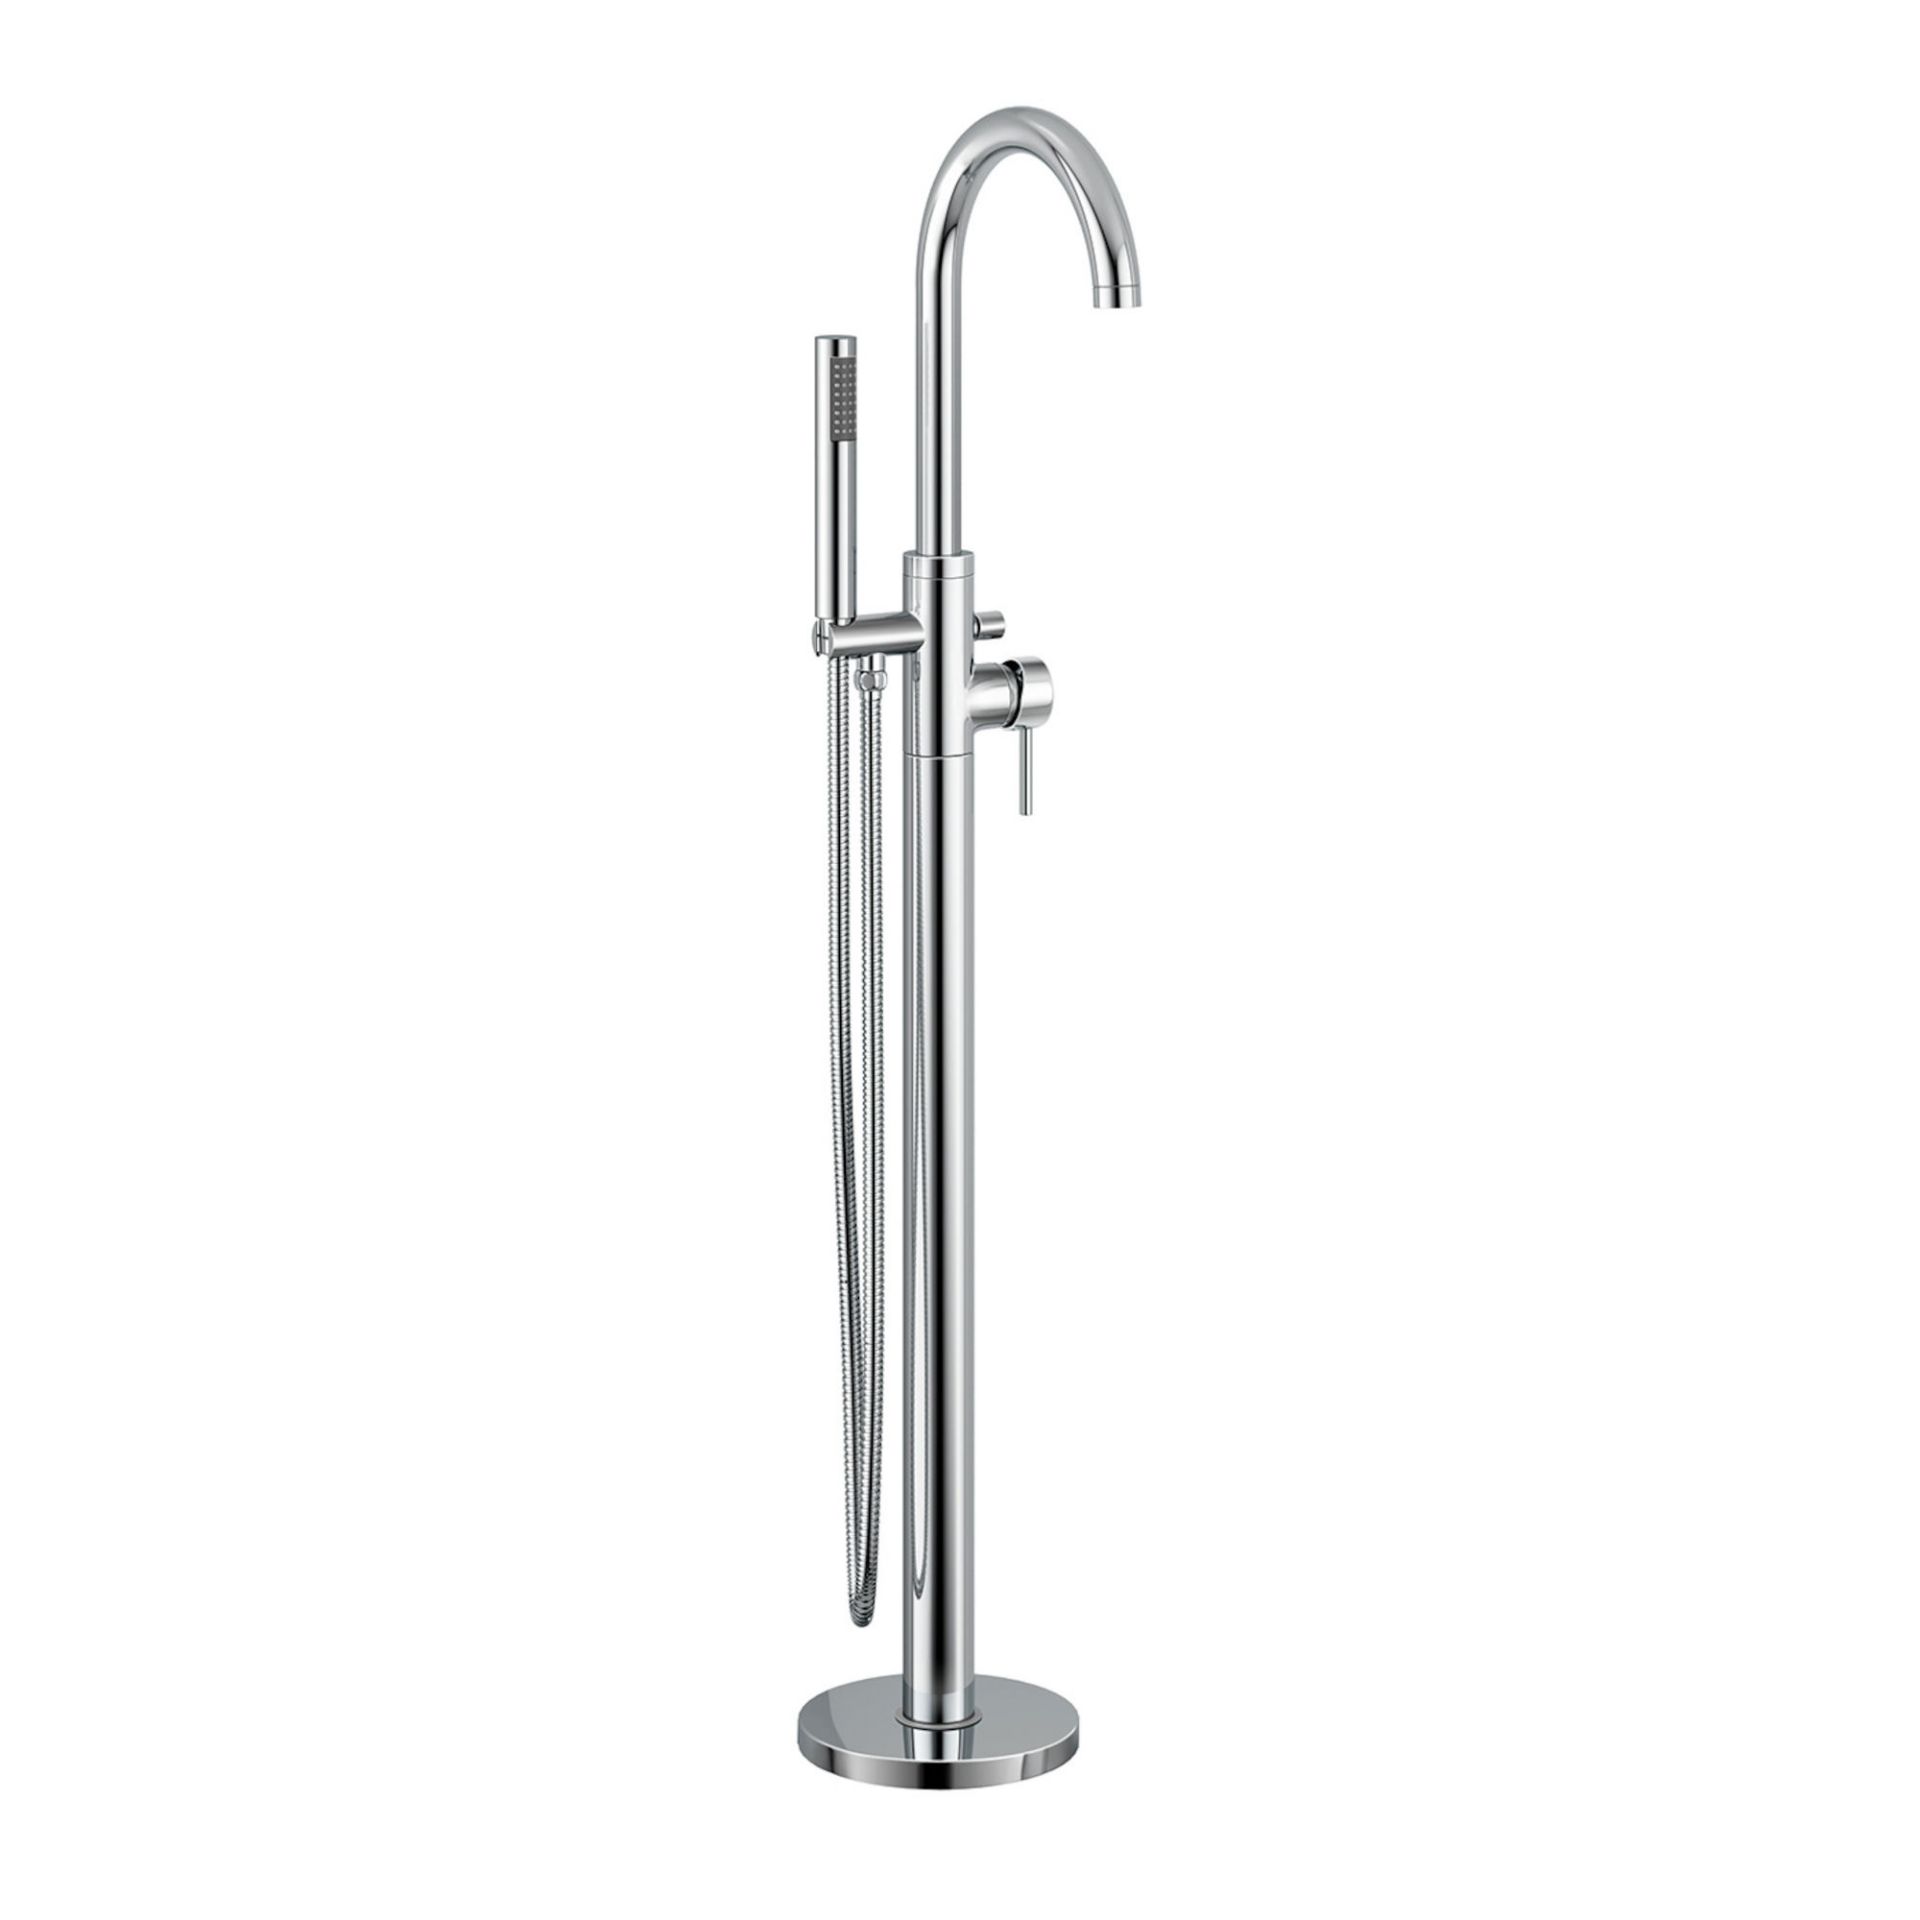 (EY90) Freestanding Bath Mixer Tap & Handheld Shower. Ideal for bathing and/or showering Crafted